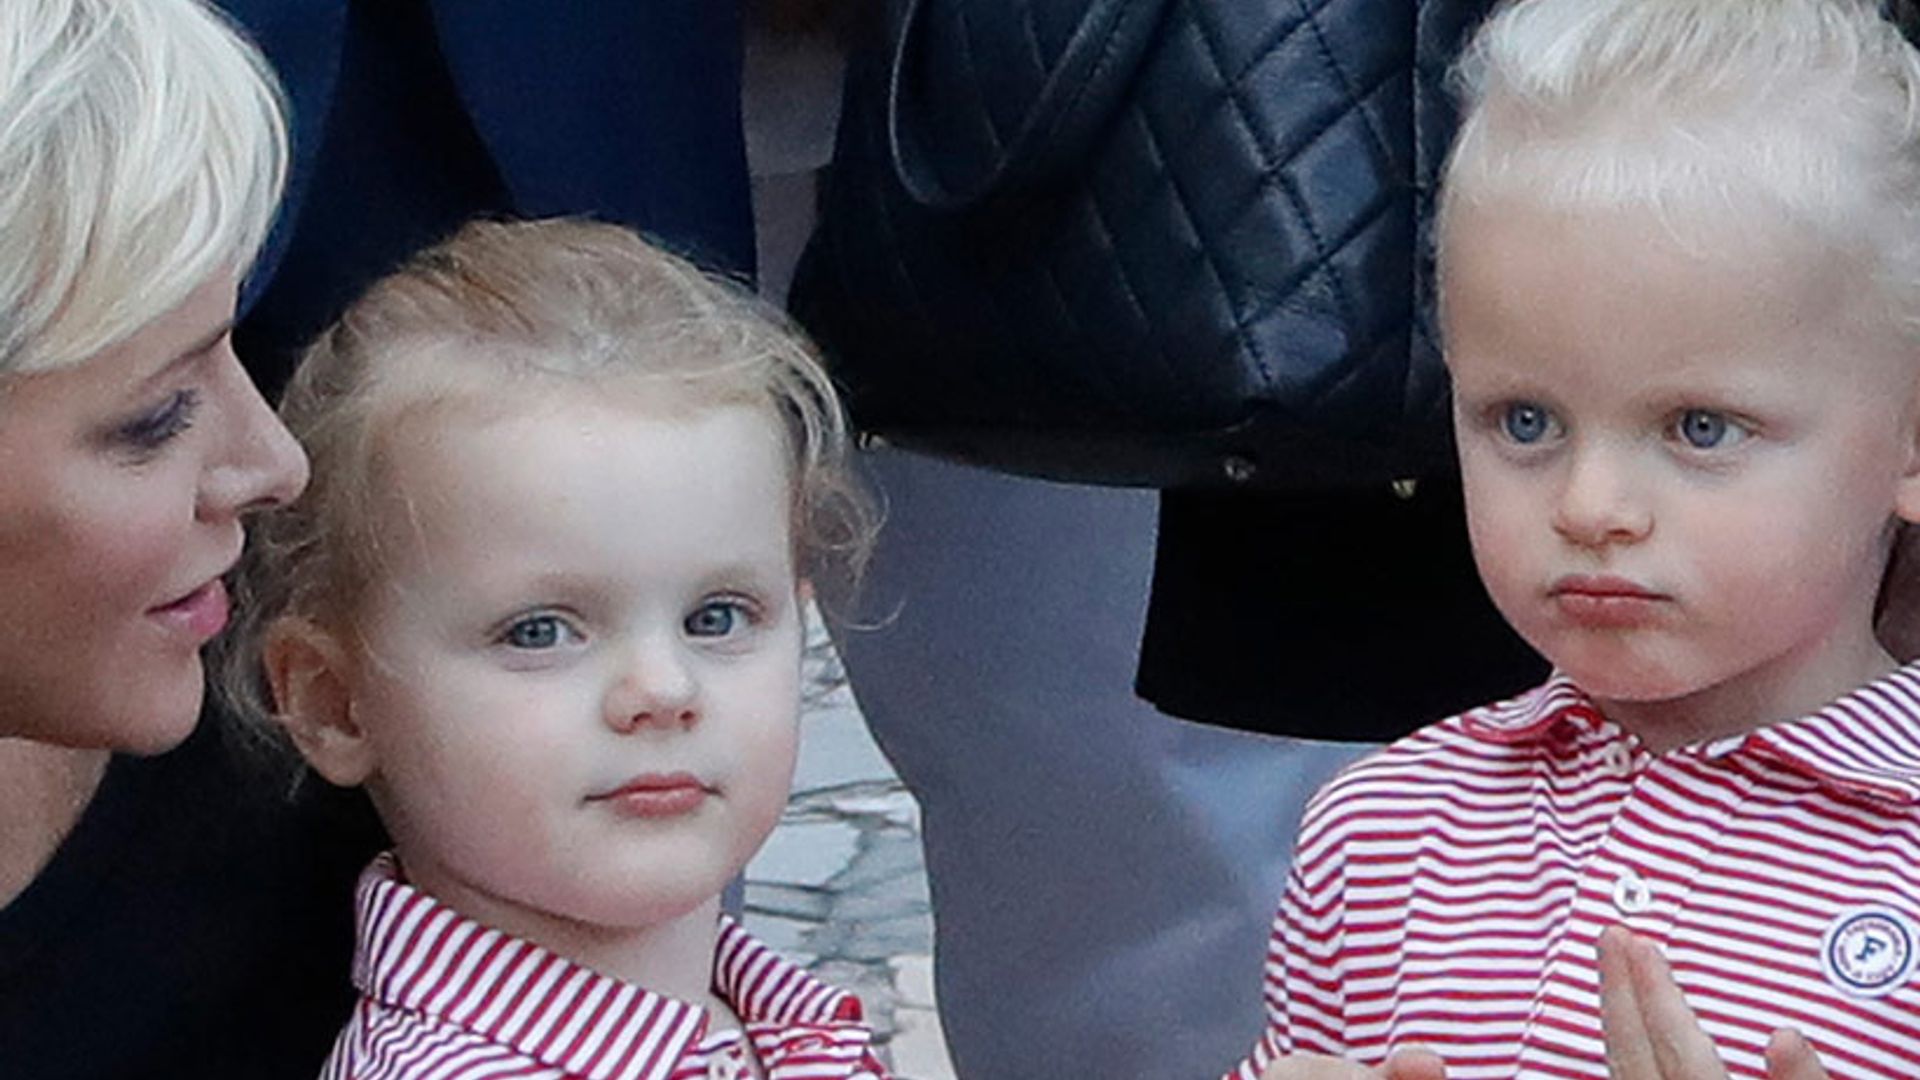 Monaco twins Prince Jacques and Princess Gabriella look all grown up in new Christmas photo 